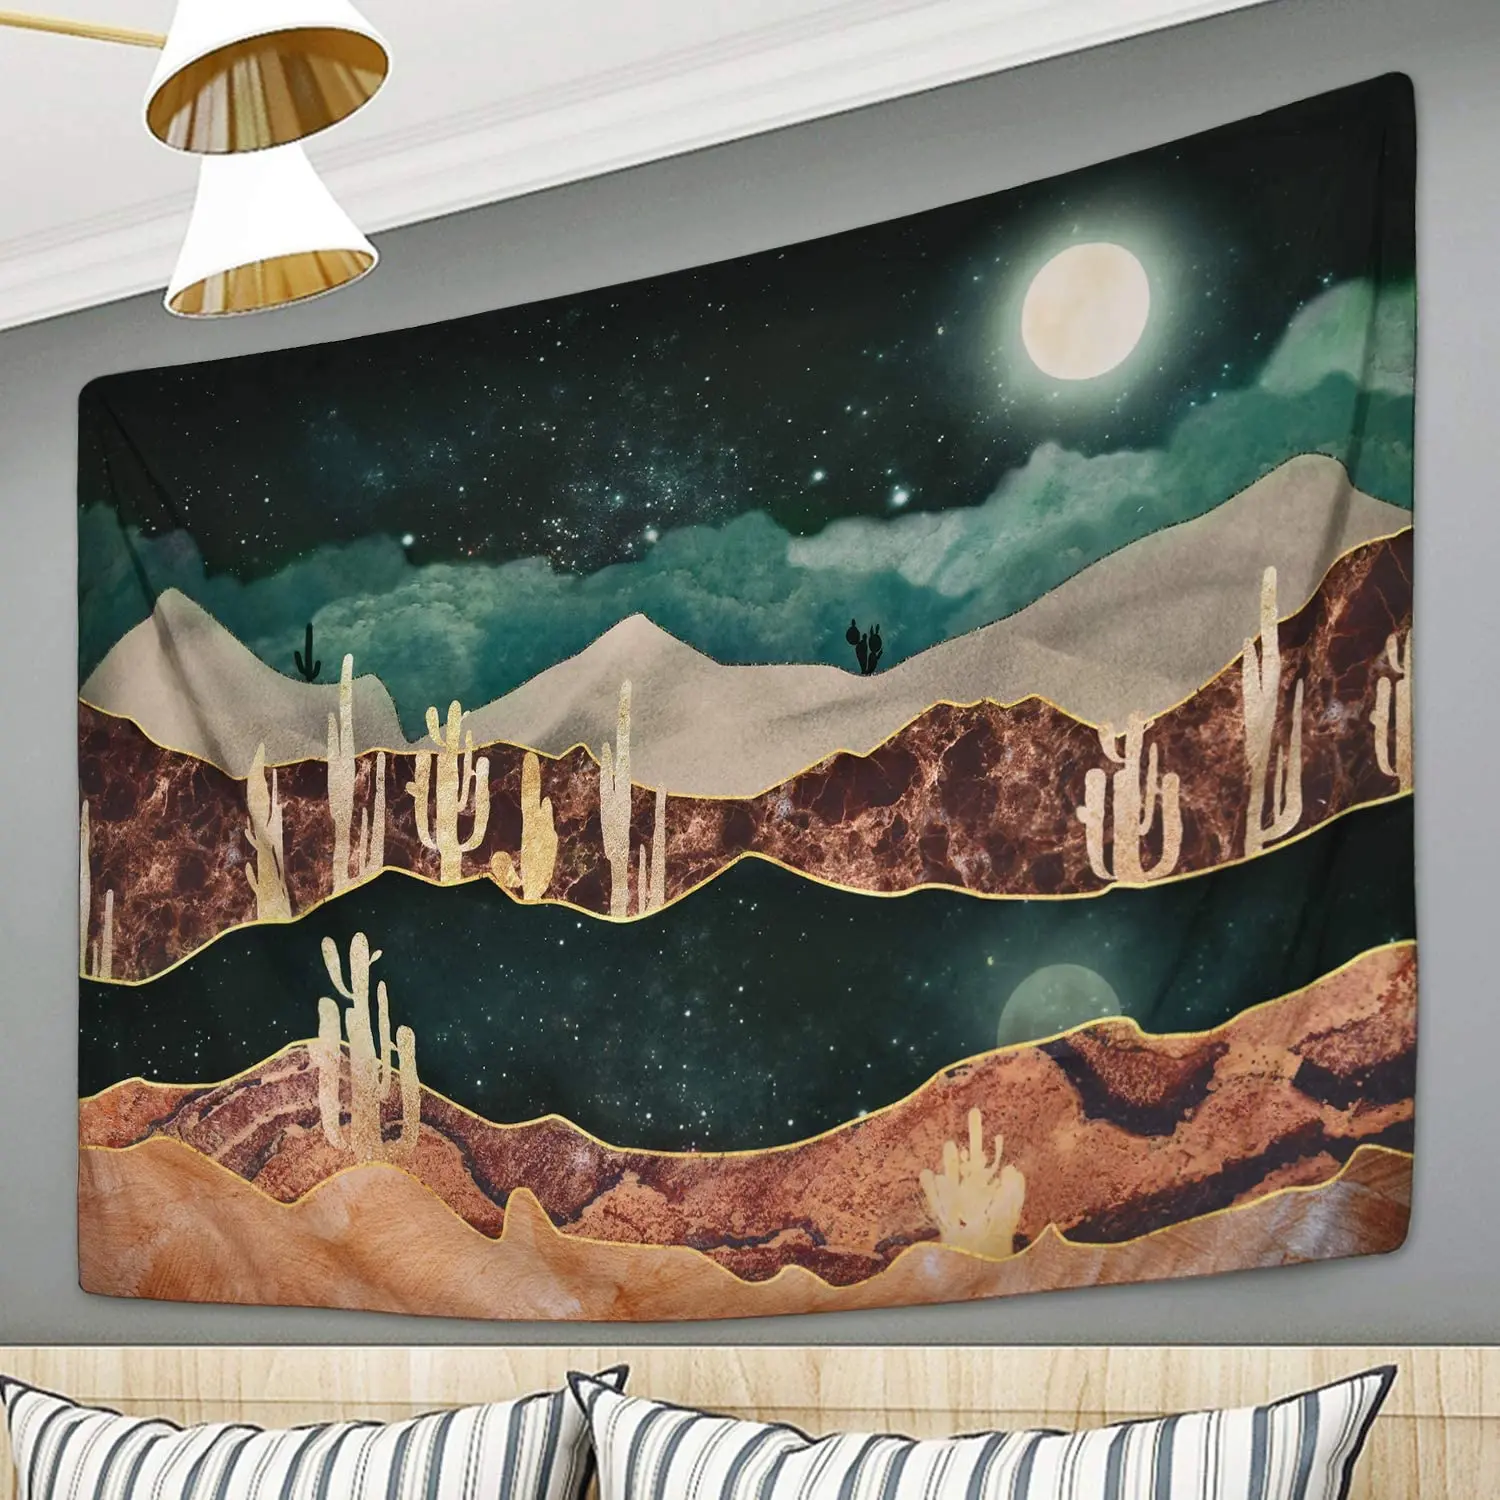 

Mountain Moon Tapestry Desert Cactus Starry Night Nature Landscape Tapestries Wall Hanging for Room bedroom hippie decor